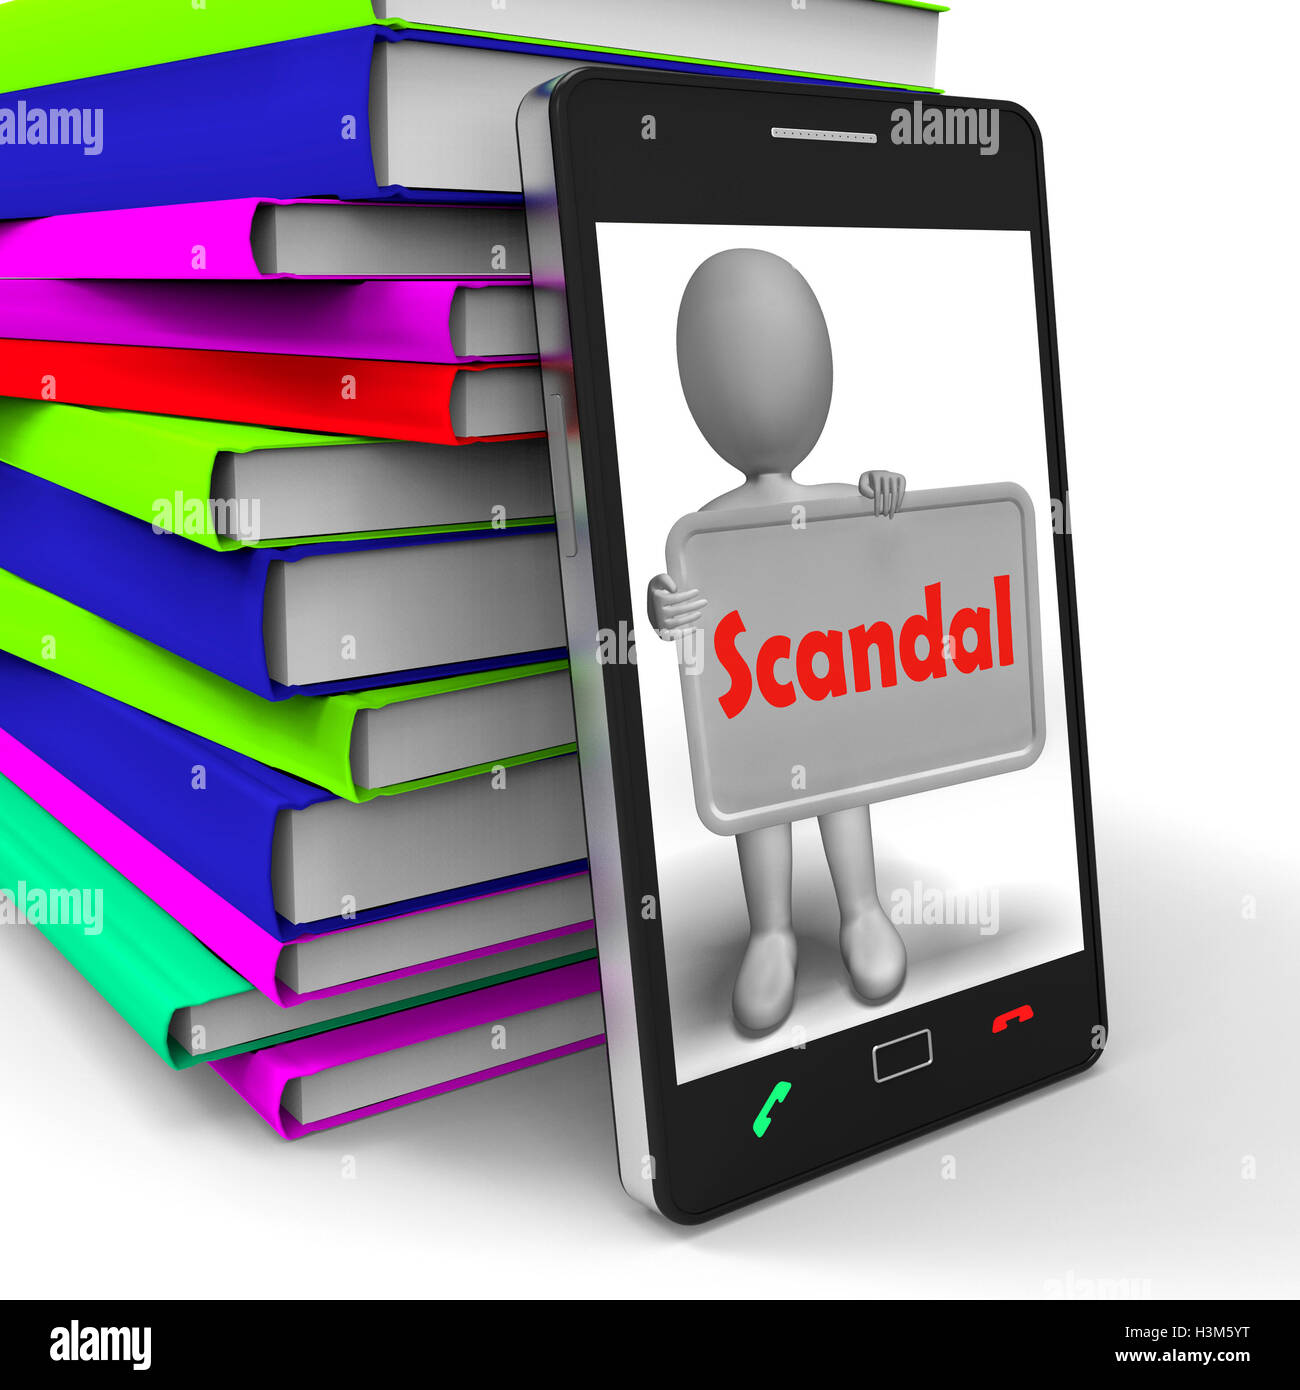 Scandal Phone Means Scandalous Act Or Disgrace Stock Photo